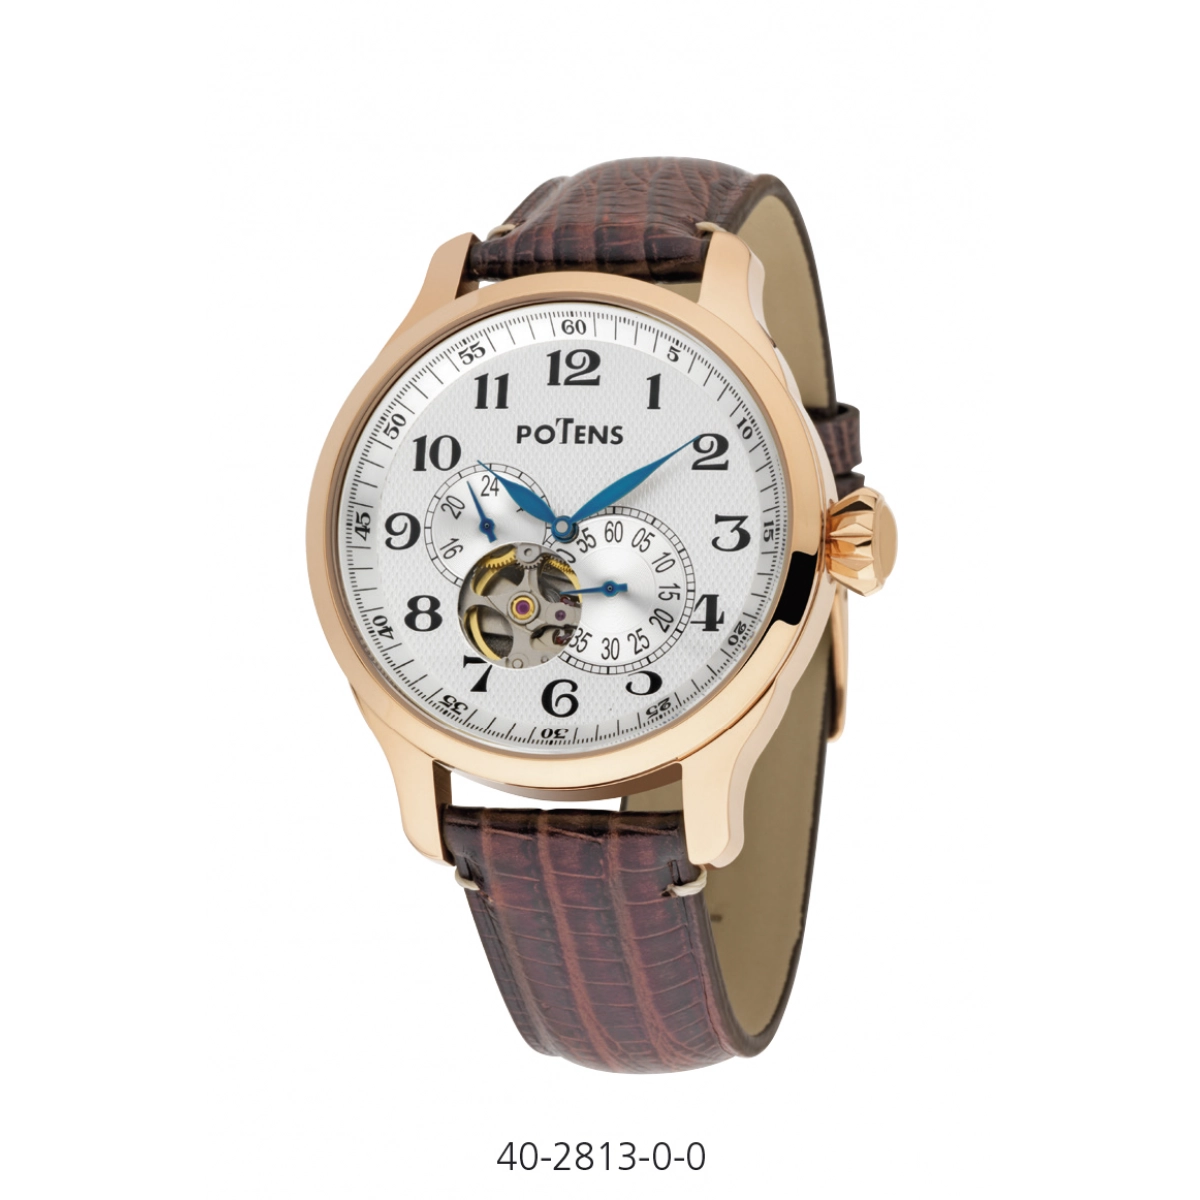 AUTOMATIC MECHANICAL MEN WATCH BOX STEEL PLATED ROSE GOLD STRAP LEATHER 40-2813-0-0 Potens